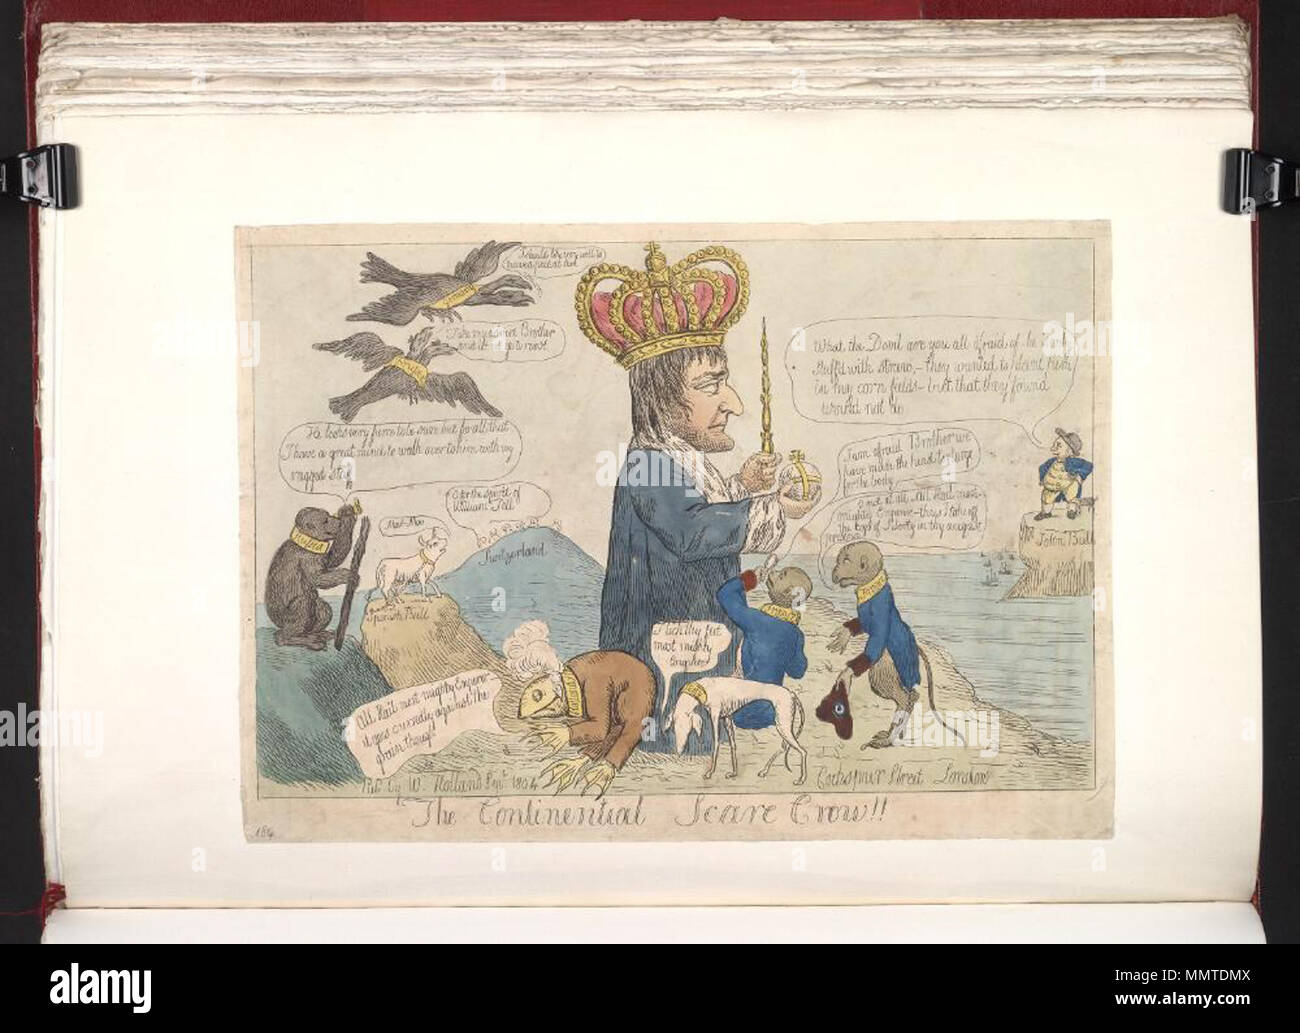 . Satire on the Napoleonic wars. (British political cartoon); Animals representing the Continental European nations obsequiously lick the feet of the Emperor Napoleon. John Bull, standing on his island with the navy offshore, looks defiantly across the Channel.; Not in BMC  The continental scare crow!!. September 1804. Bodleian Libraries, The continental scare crow Stock Photo